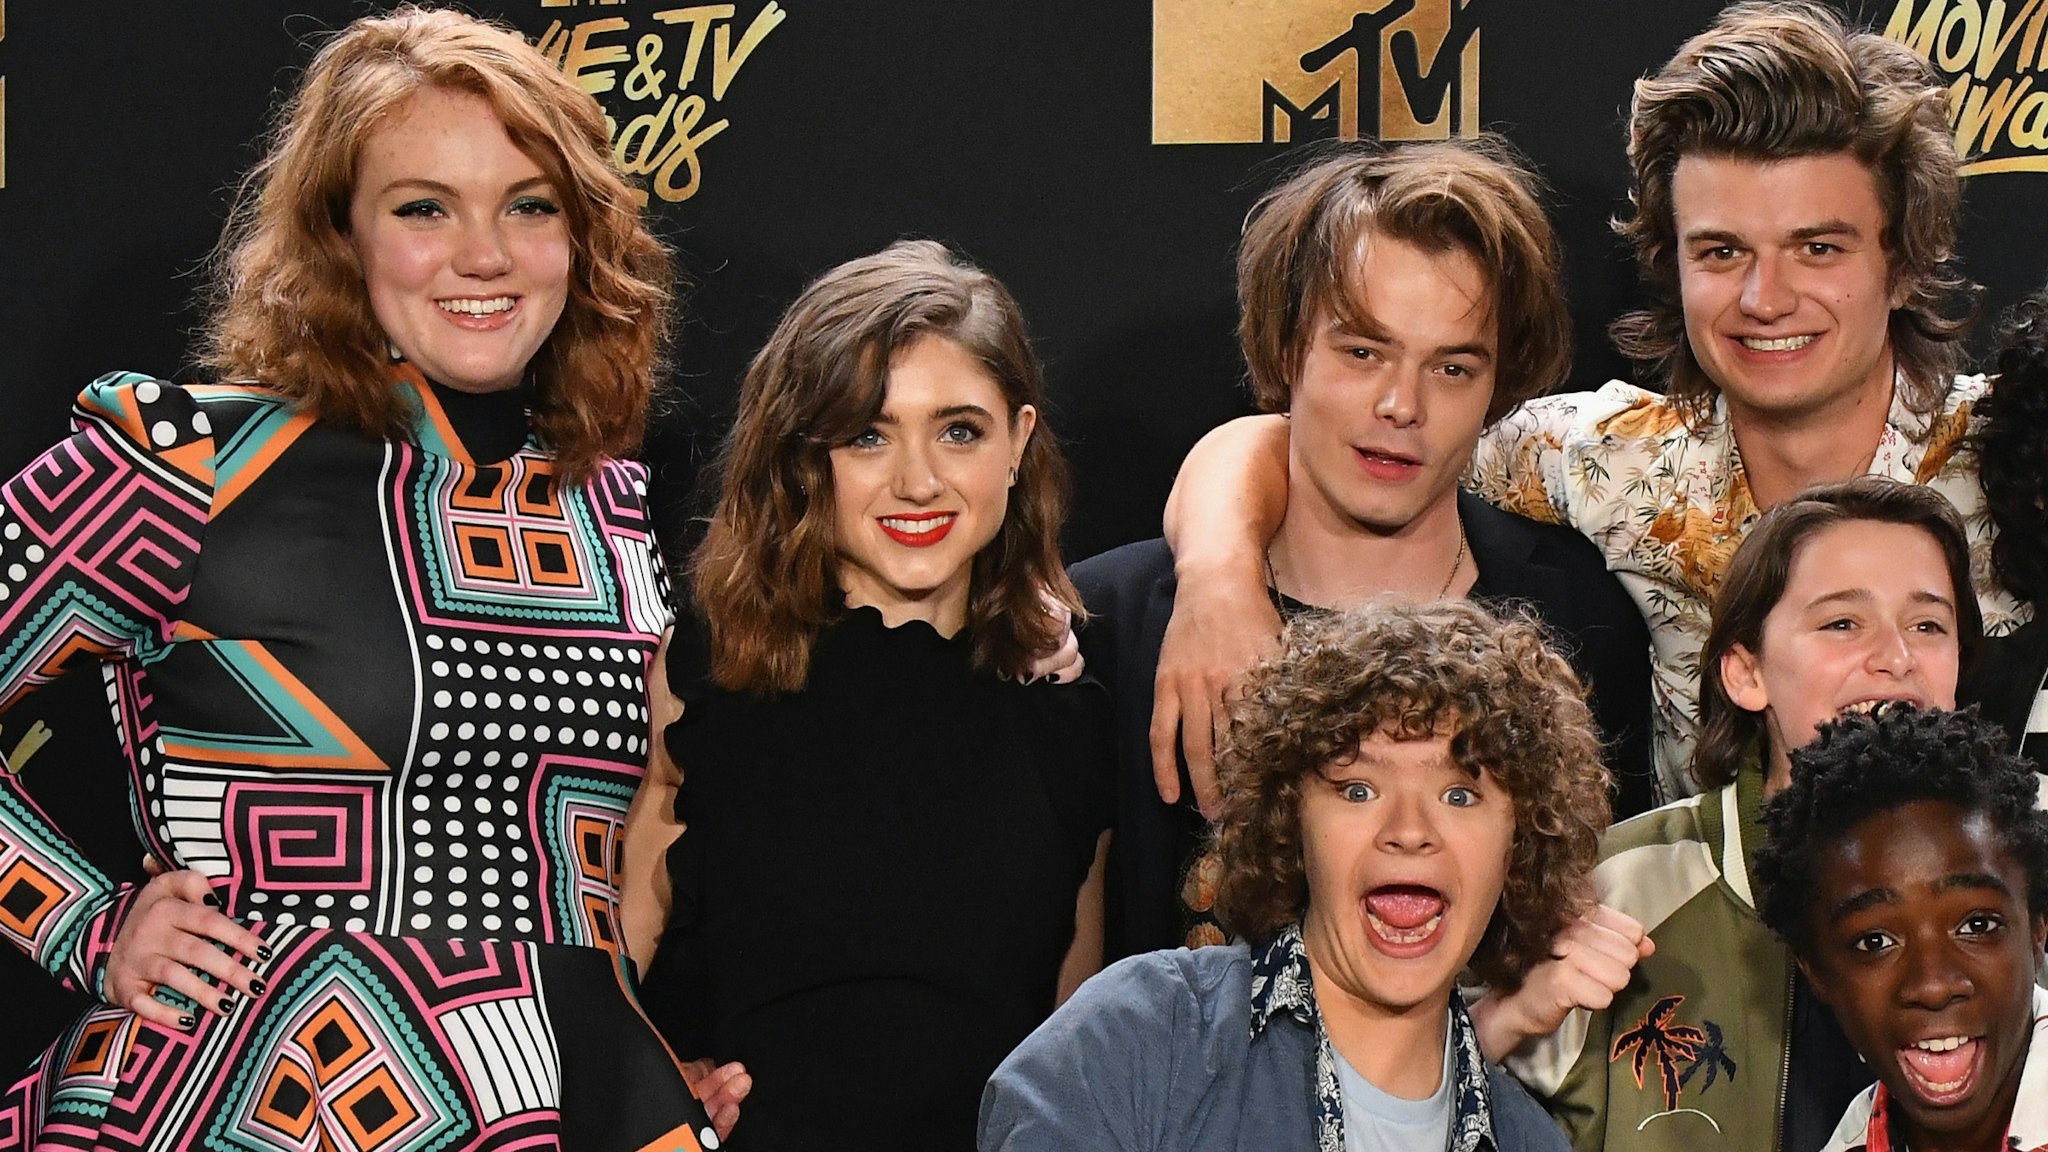 Actors Shannon Purser, Natalia Dyer, Charlie Heaton, Joe Keery, (middle, L-R) Noah Schnapp, Finn Wolfhard, Millie Bobby Brown, and (front L-R) Gaten Matarazzo and Caleb McLaughlin of 'Stranger Things,' winner of the Show of the Year award, pose in the press room during the 2017 MTV Movie And TV Awards at The Shrine Auditorium on May 7, 2017 in Los Angeles, California.